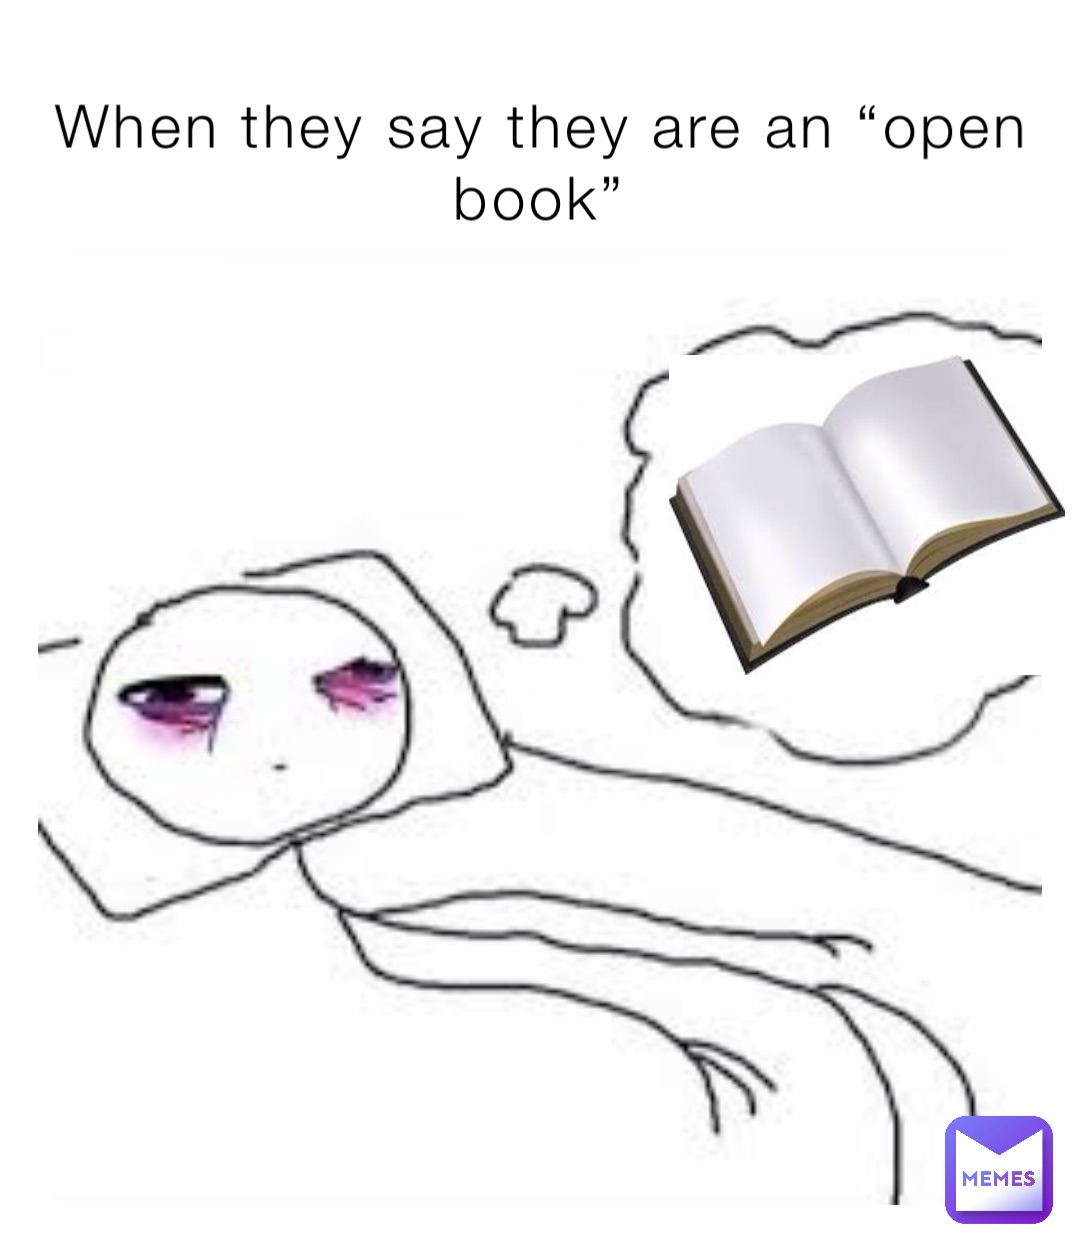 When they say they are an “open book”